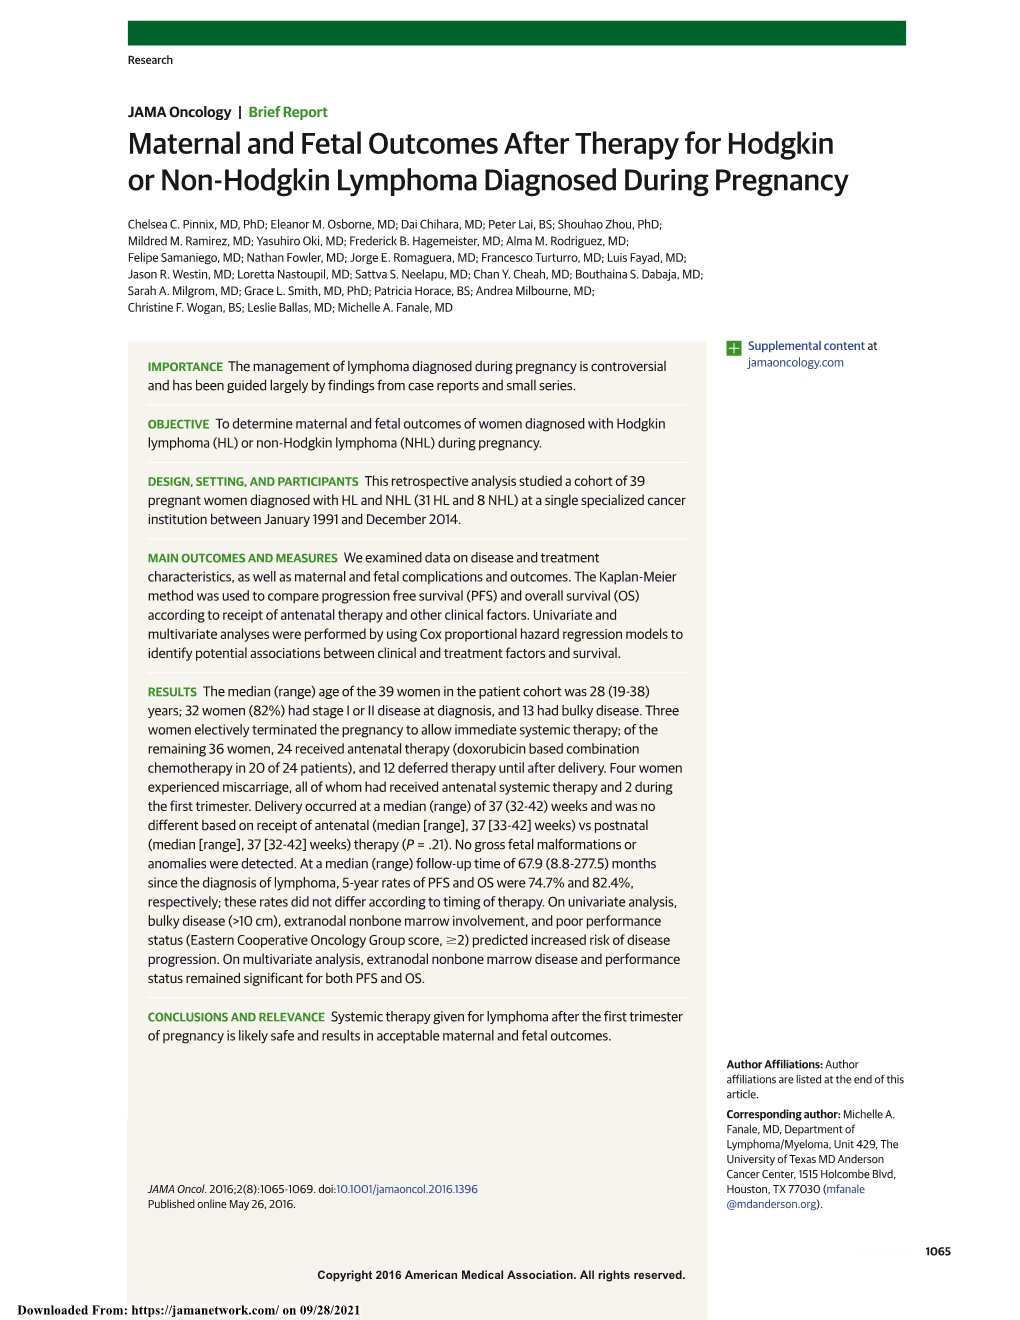 Maternal and Fetal Outcomes After Therapy for Hodgkin Or Non-Hodgkin Lymphoma Diagnosed During Pregnancy